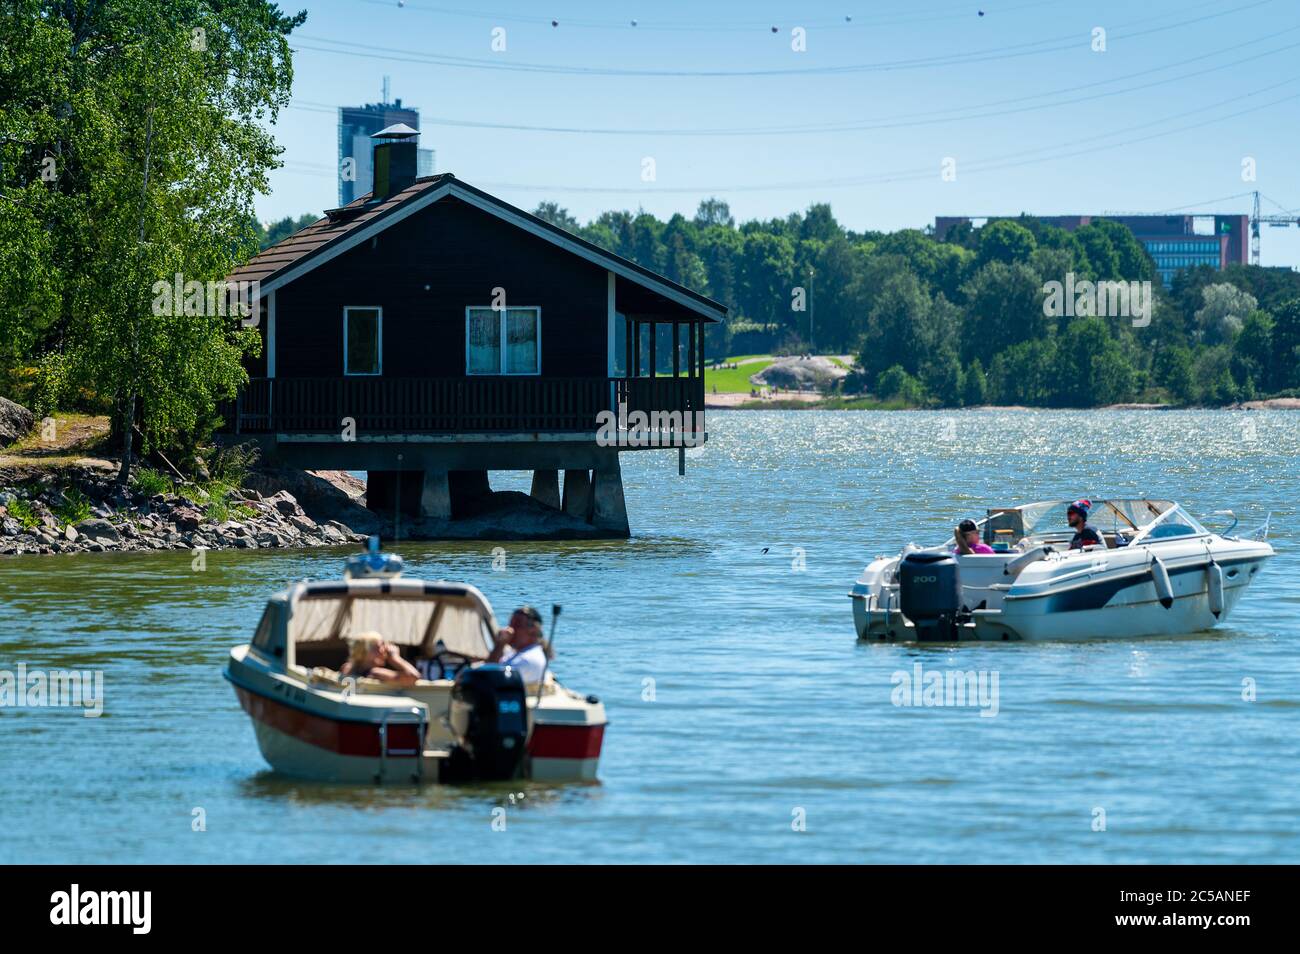 Helsinki / Finland - JUNE 21, 2020: An old wooden Finnish sauna building standing on top of the water. Stock Photo